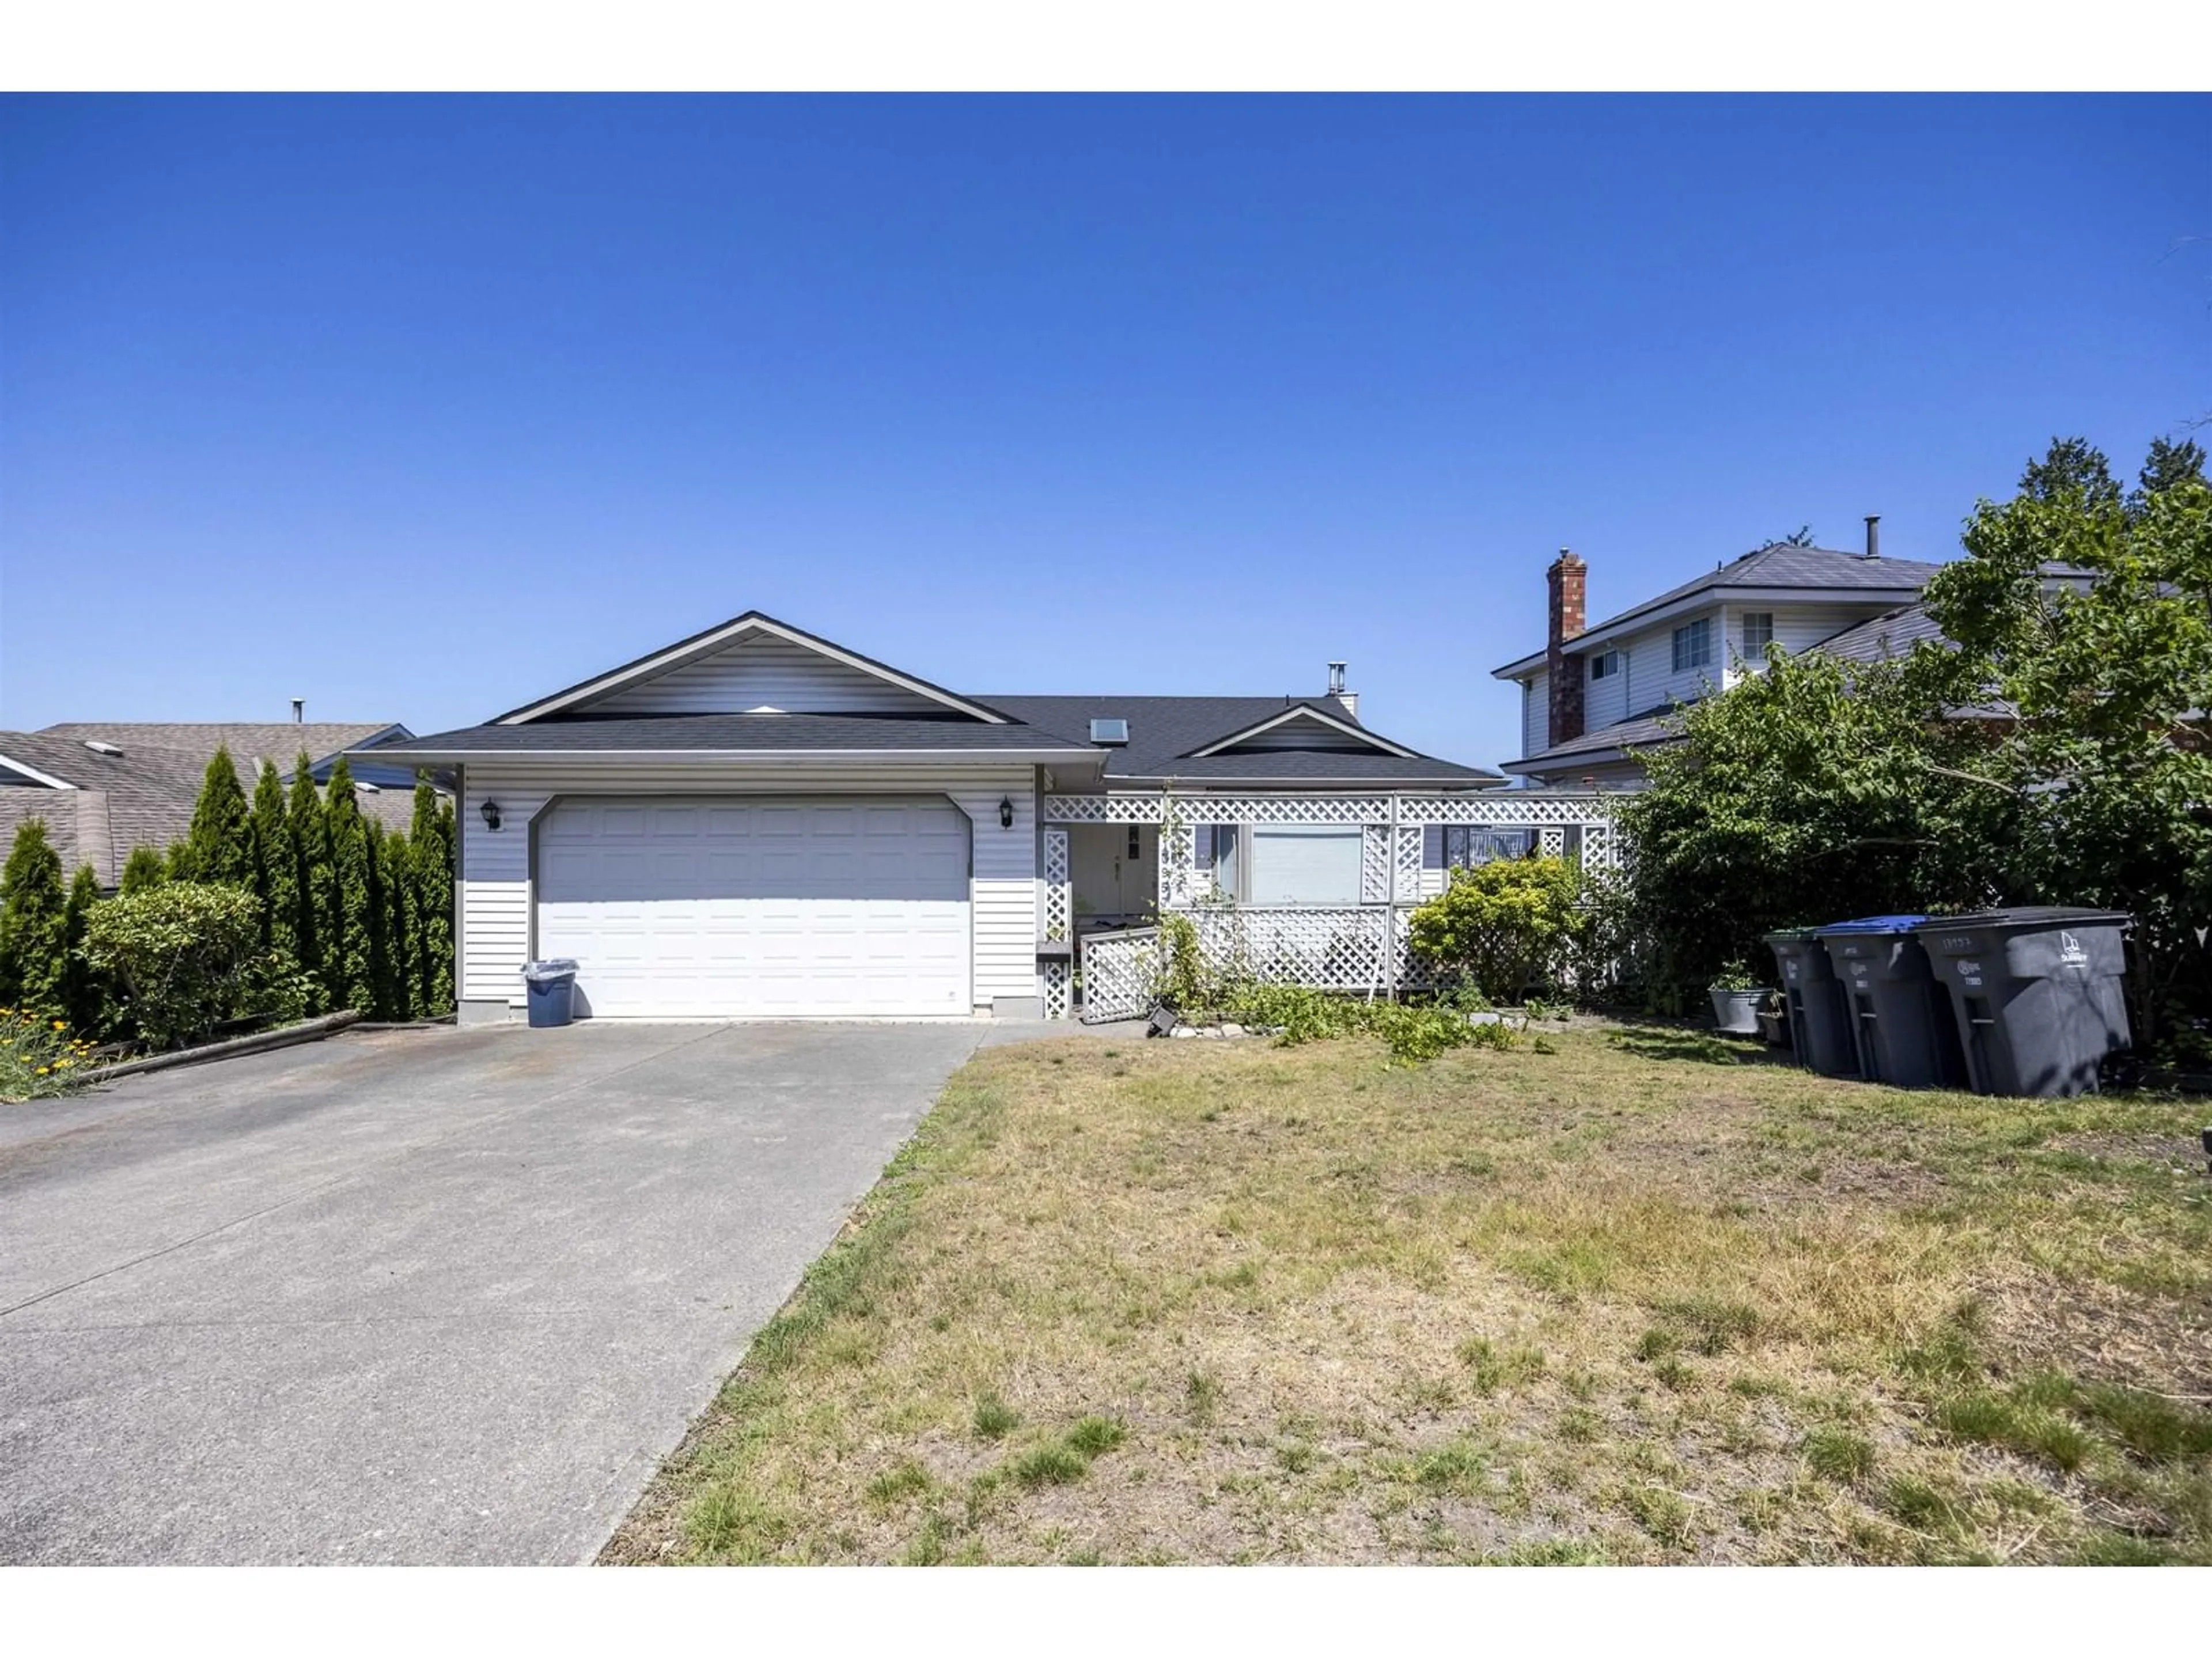 Frontside or backside of a home for 13957 115A AVENUE, Surrey British Columbia V3R9Y4